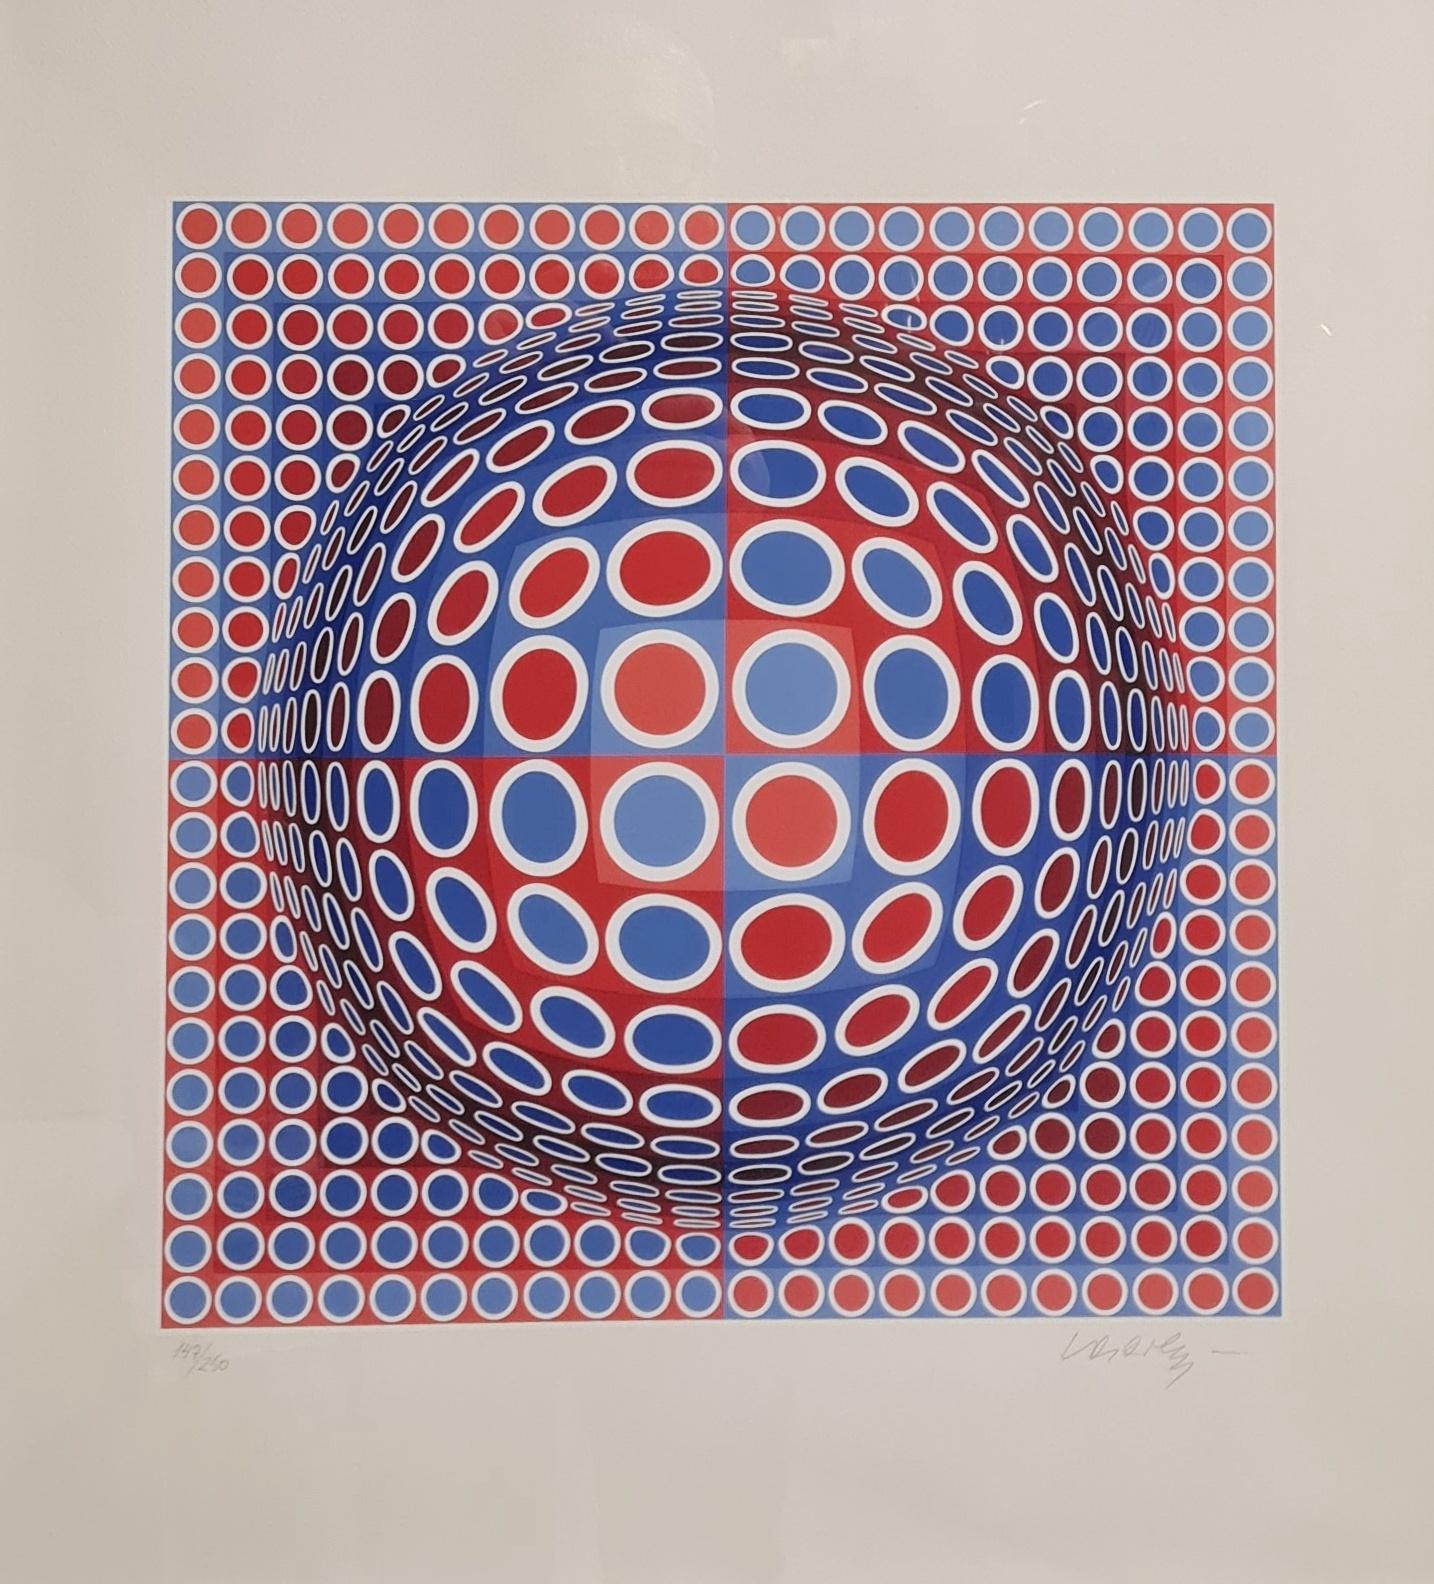 A beautiful work by the world renowned and father of OP art Hunargian French Artist Victor Vasarely.
This fine example of a 3d illusion sphere is bright blue and red against a white background. The screenprint itself is 40 x 40cm and is signed and